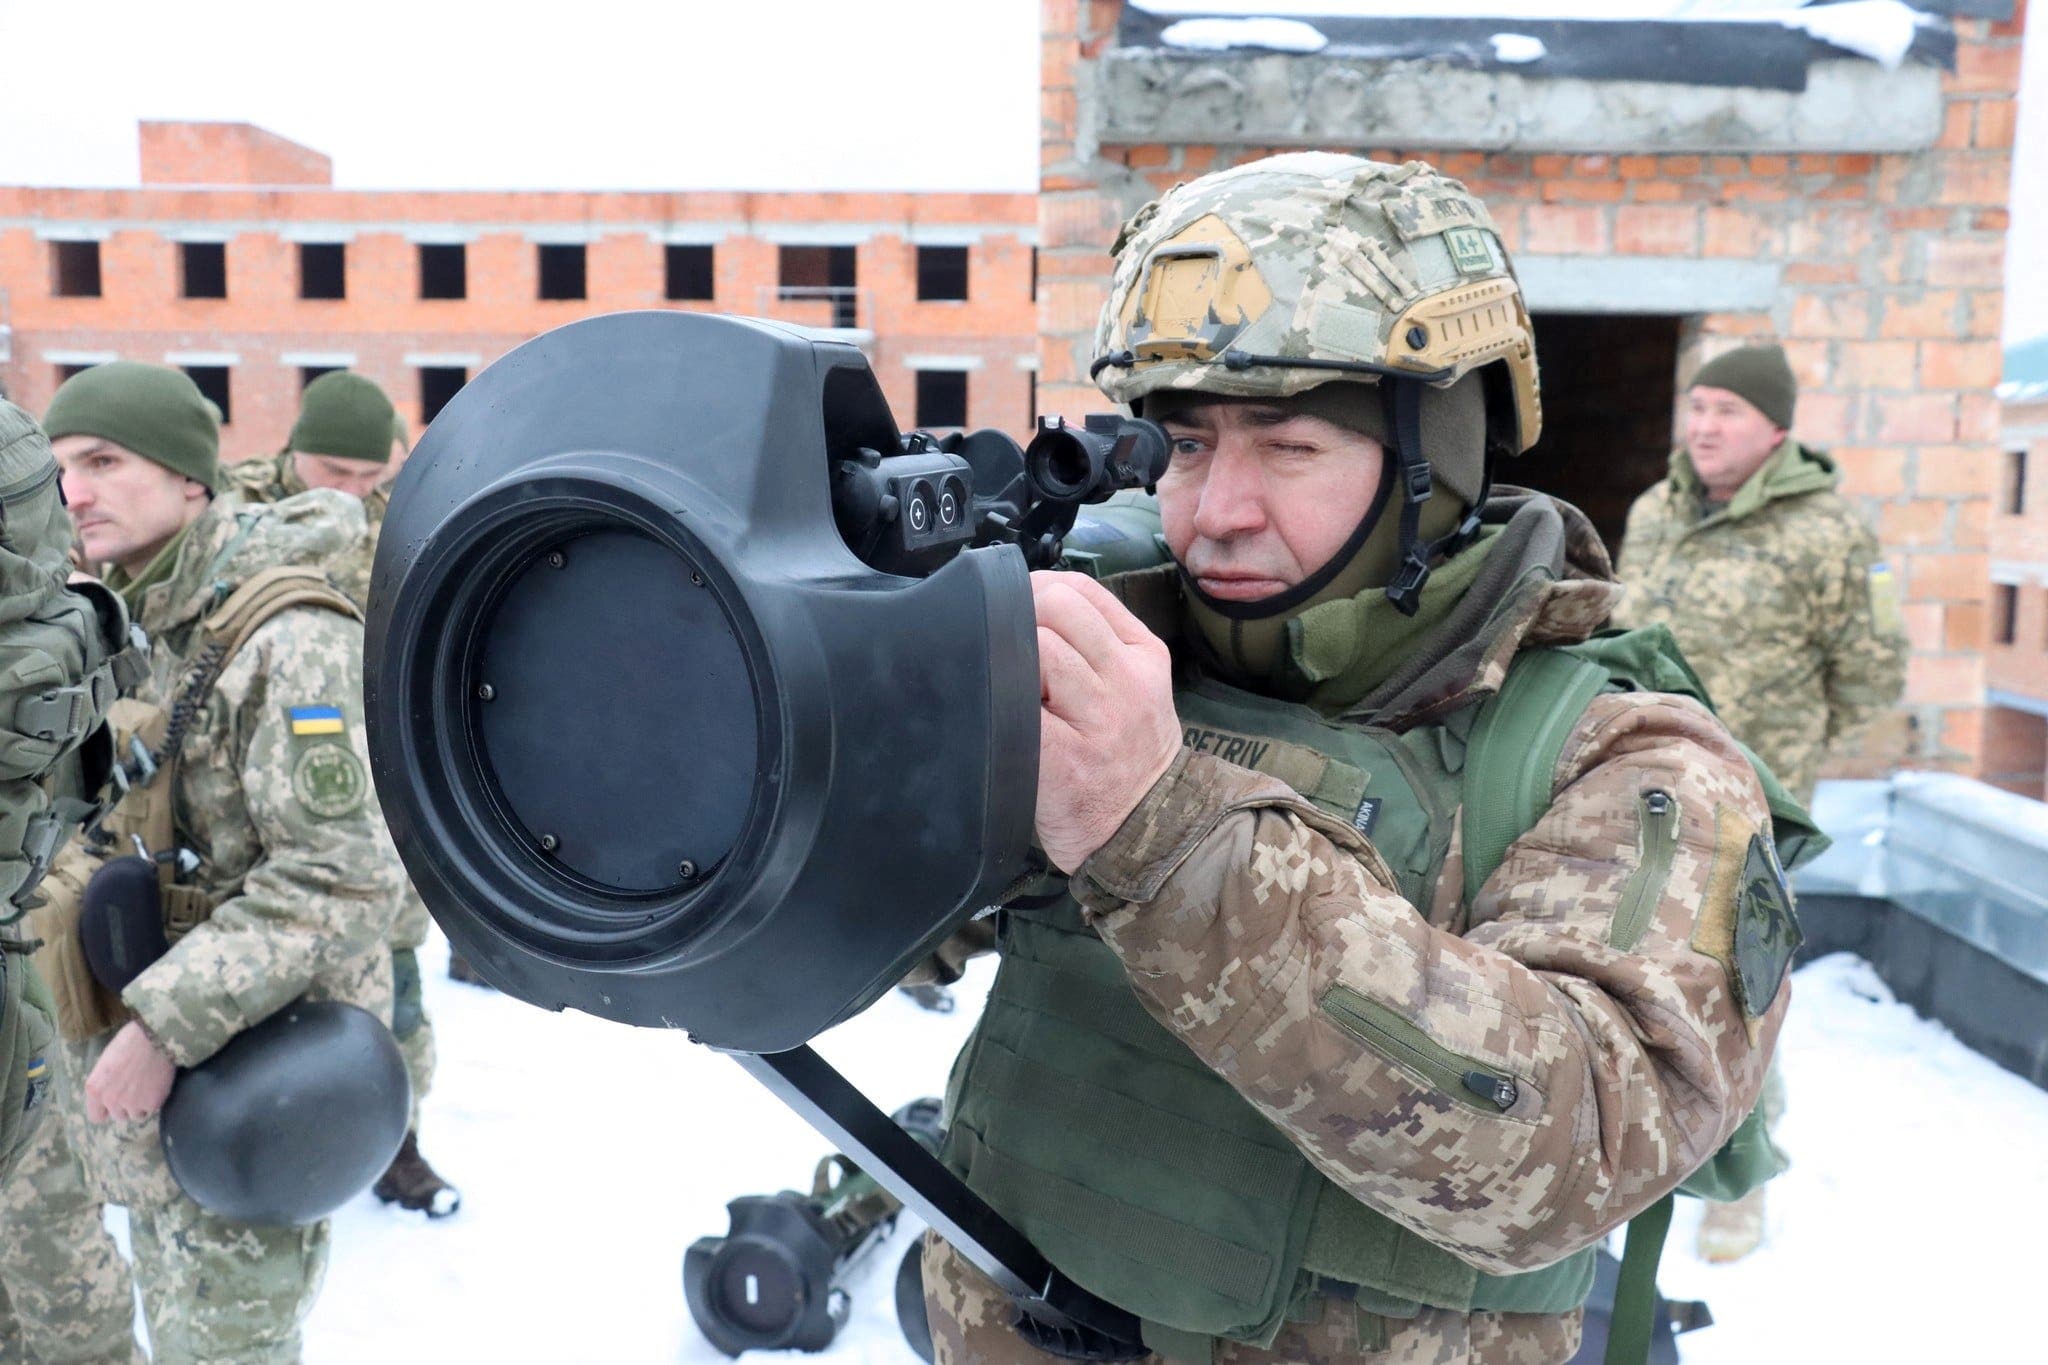 A Ukrainian service member points a next generation light anti-tank weapon (NLAW), supplied by Britain amid tensions between Russia and the West over Ukraine, during drills in the Lviv region, Ukraine. (File photo: Reuters)